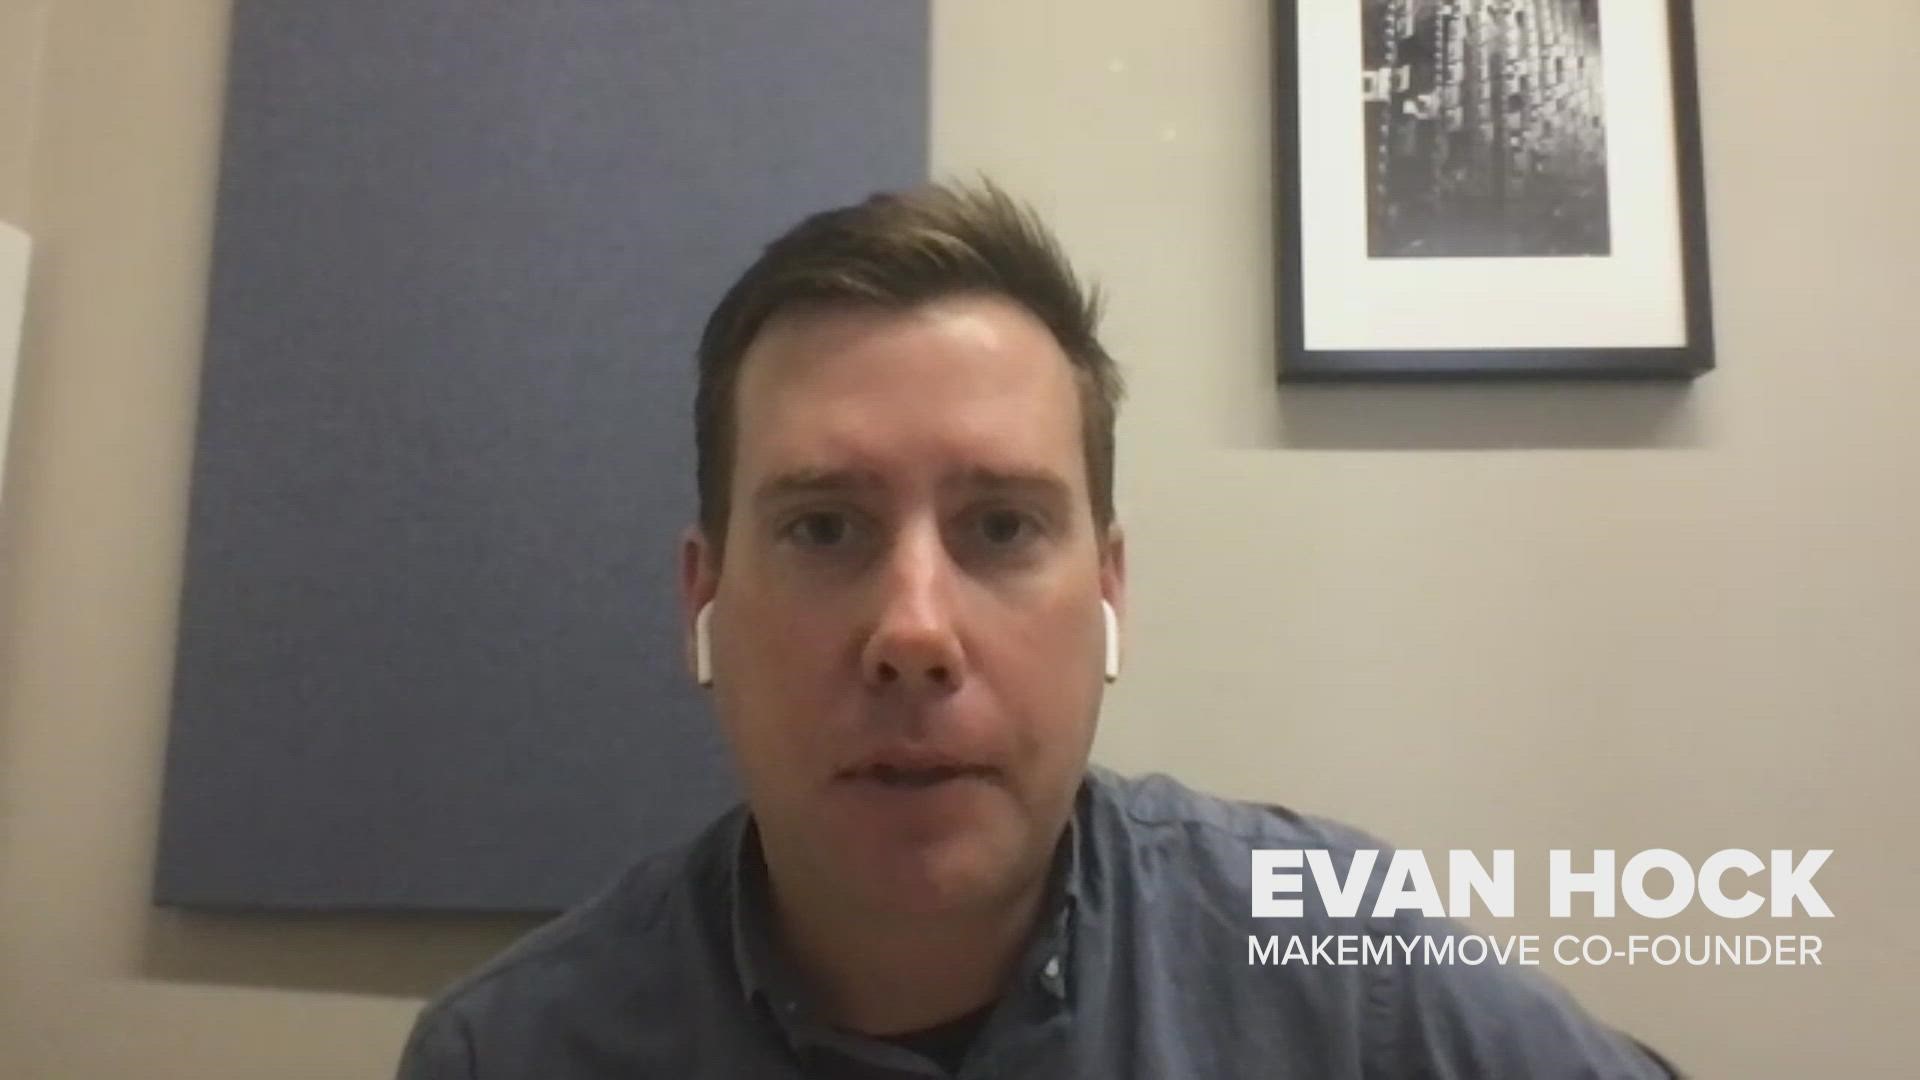 Evan Hock is the co-founder of an online marketplace that helps people relocate to find remote jobs. He explains how this is likely going to become more of the norm.